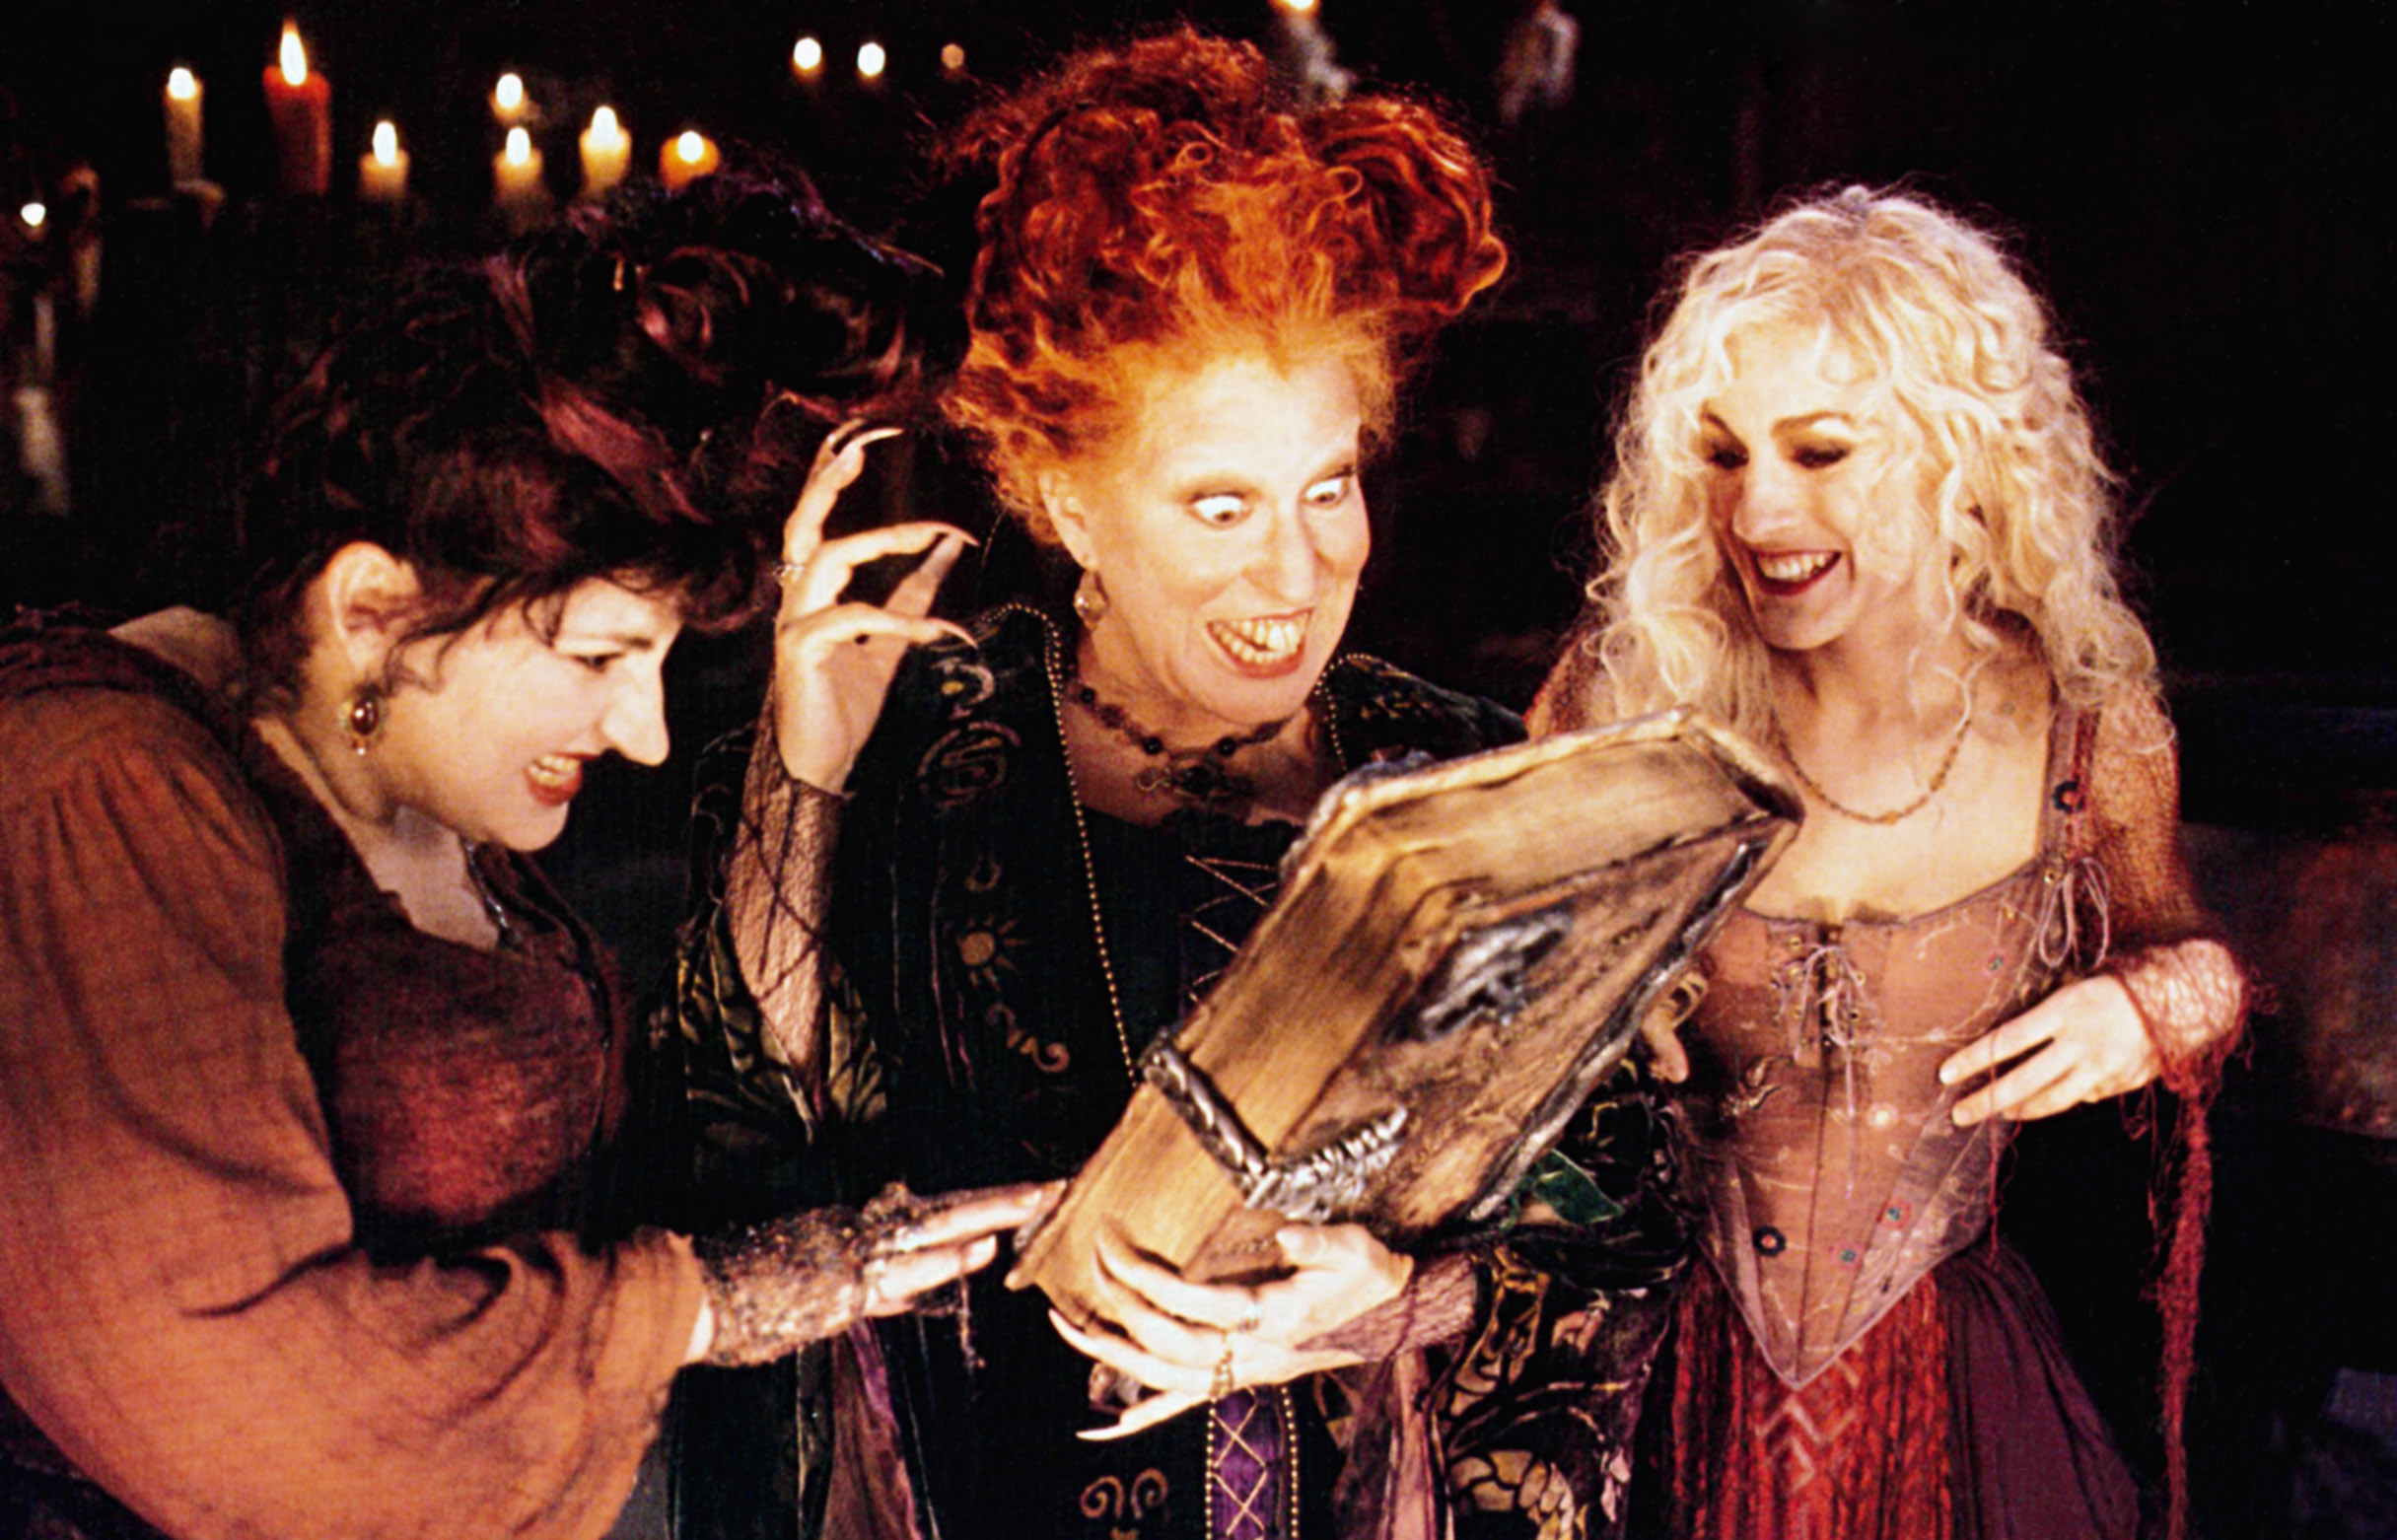 Kathy Najimy, Bette Midler, and Sarah Jessica Parker looking excitedly at a book